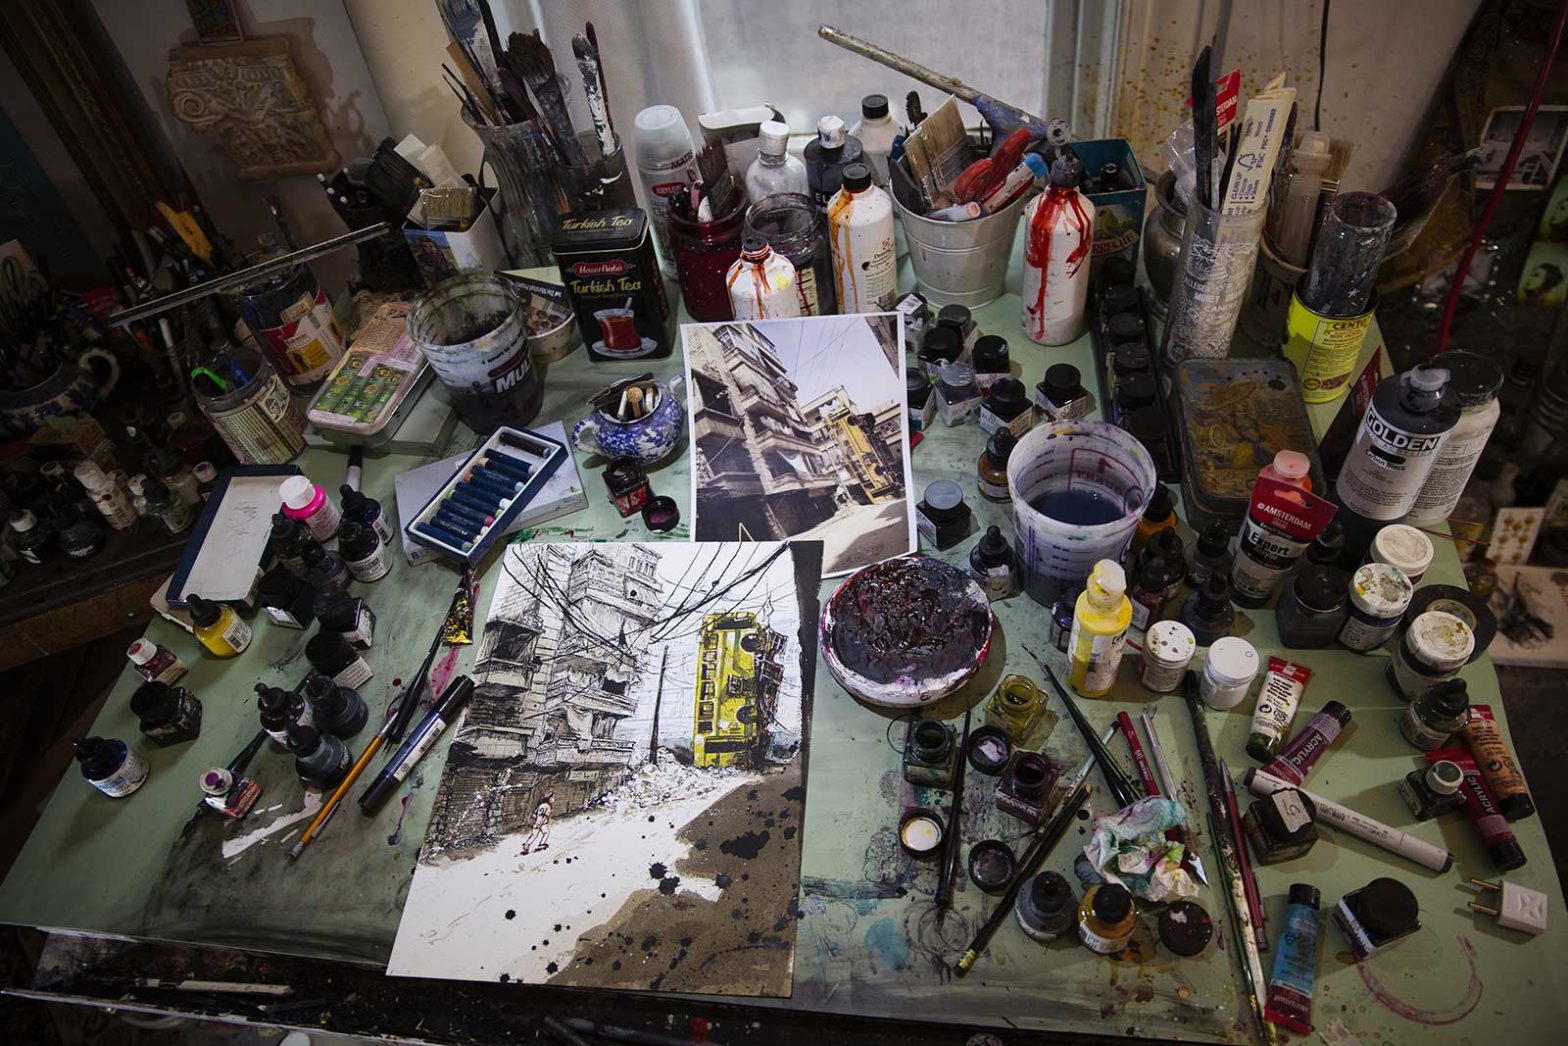 An artist's table covered with materials and a half finished piece